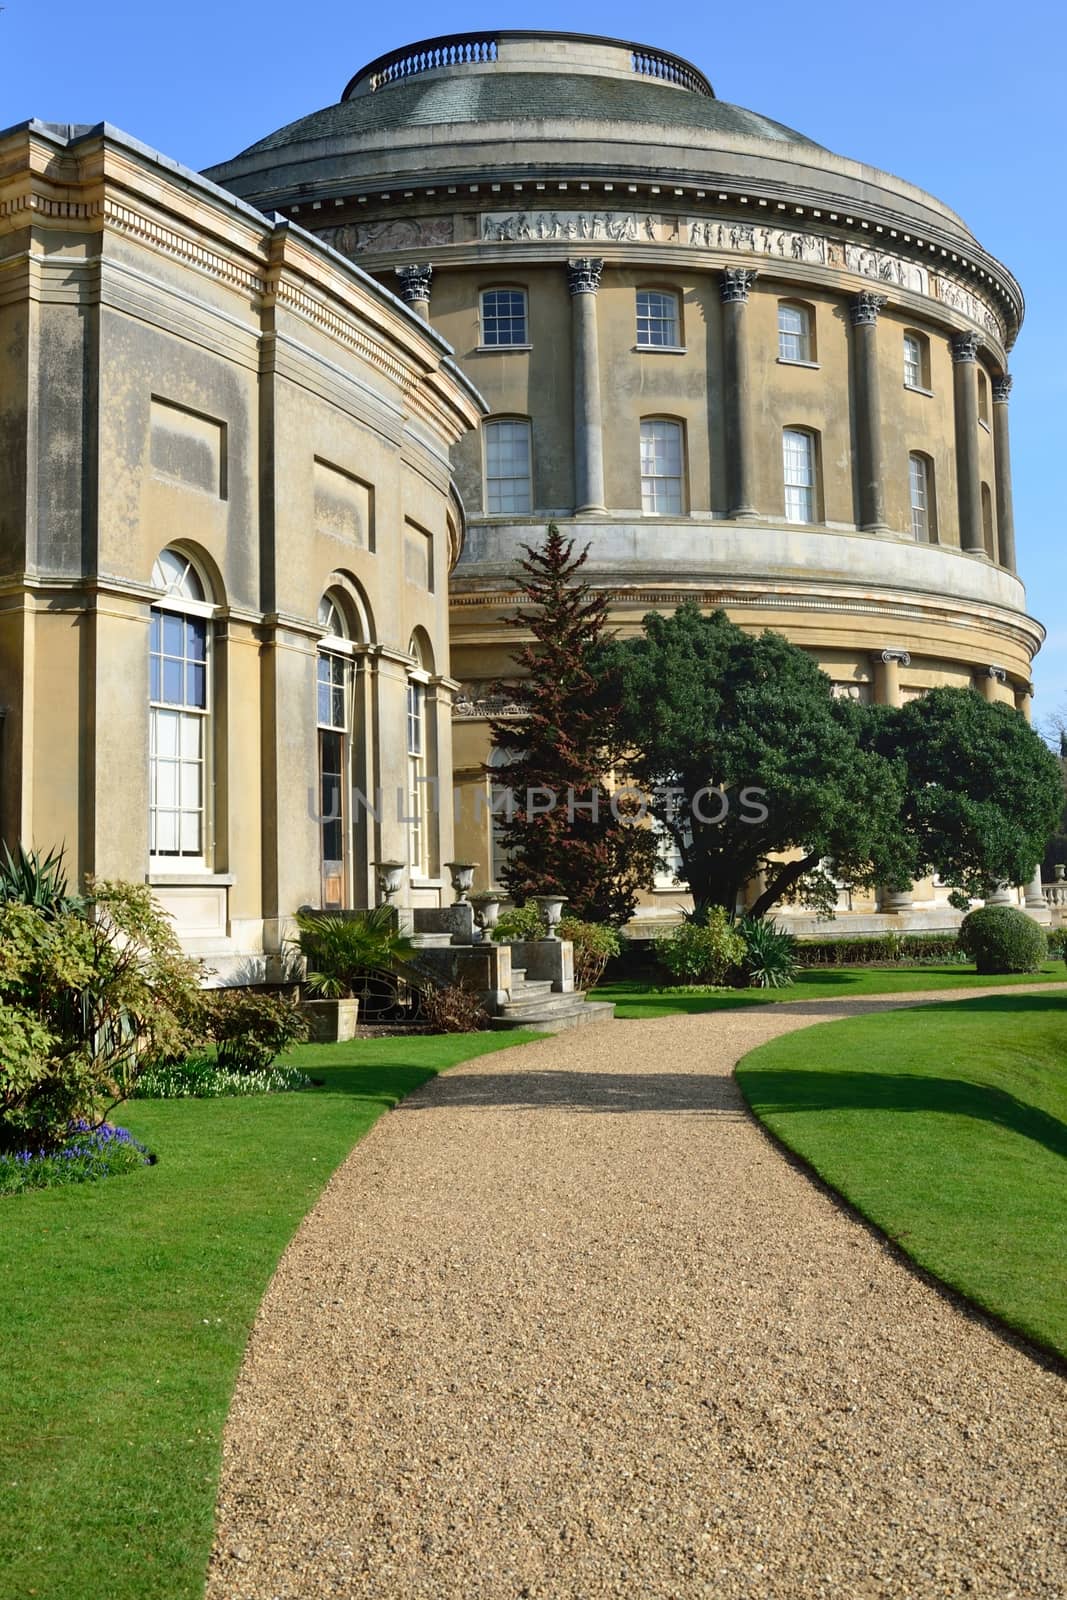 Ickworth Hall and curved path